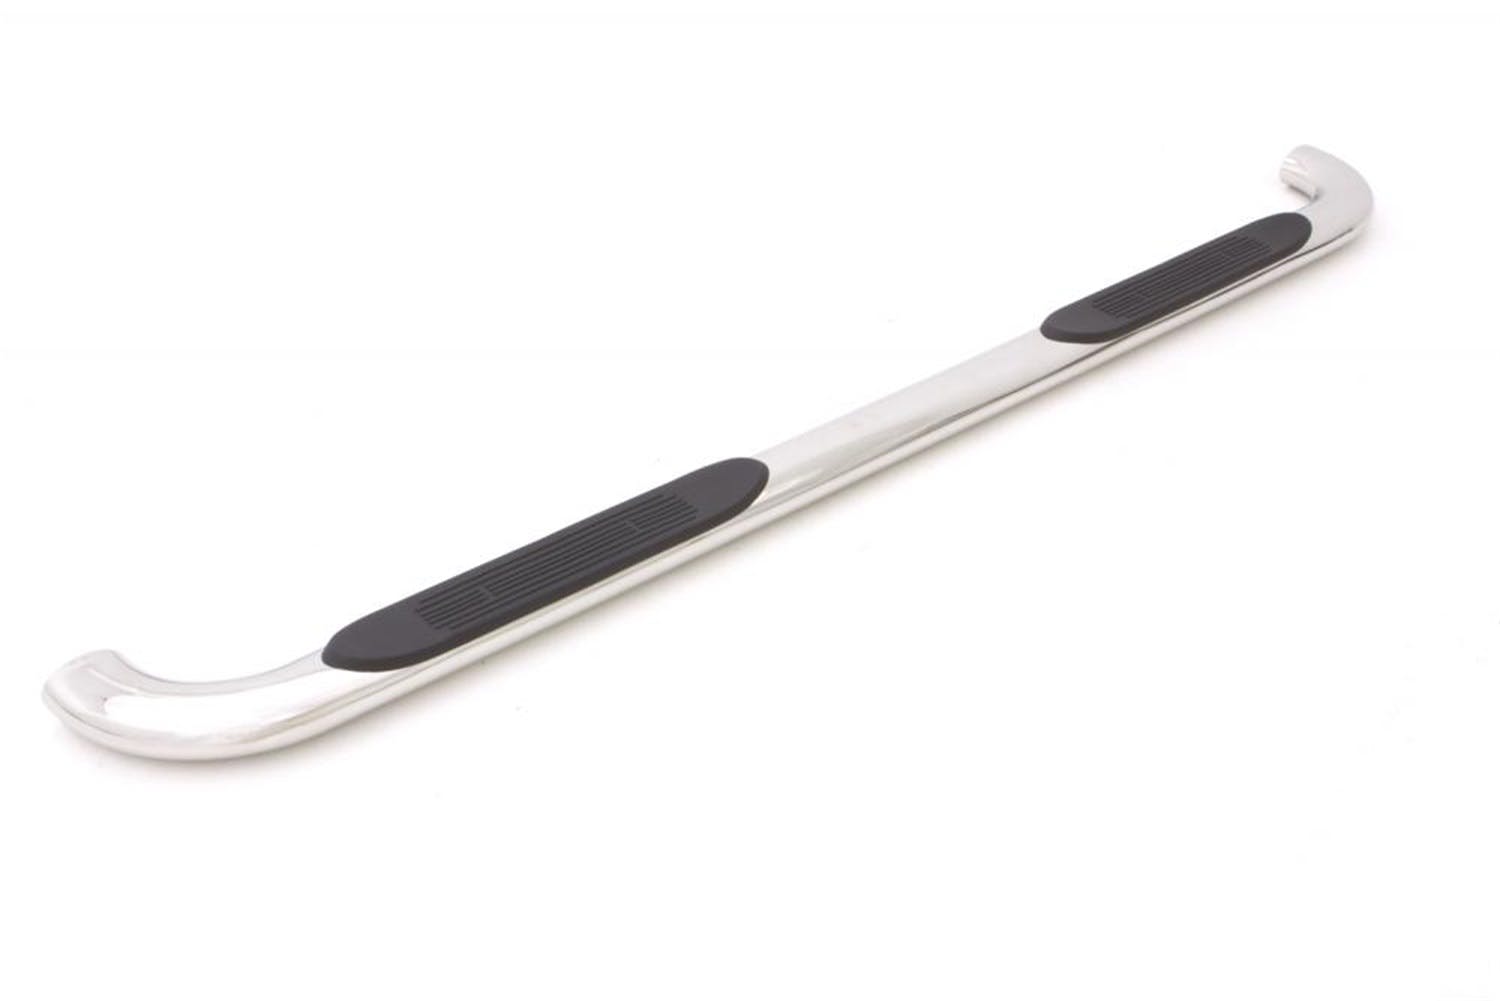 LUND 23476453 4 Inch Oval Curved Nerf Bar - Black 4 In OVAL CURVED STEEL